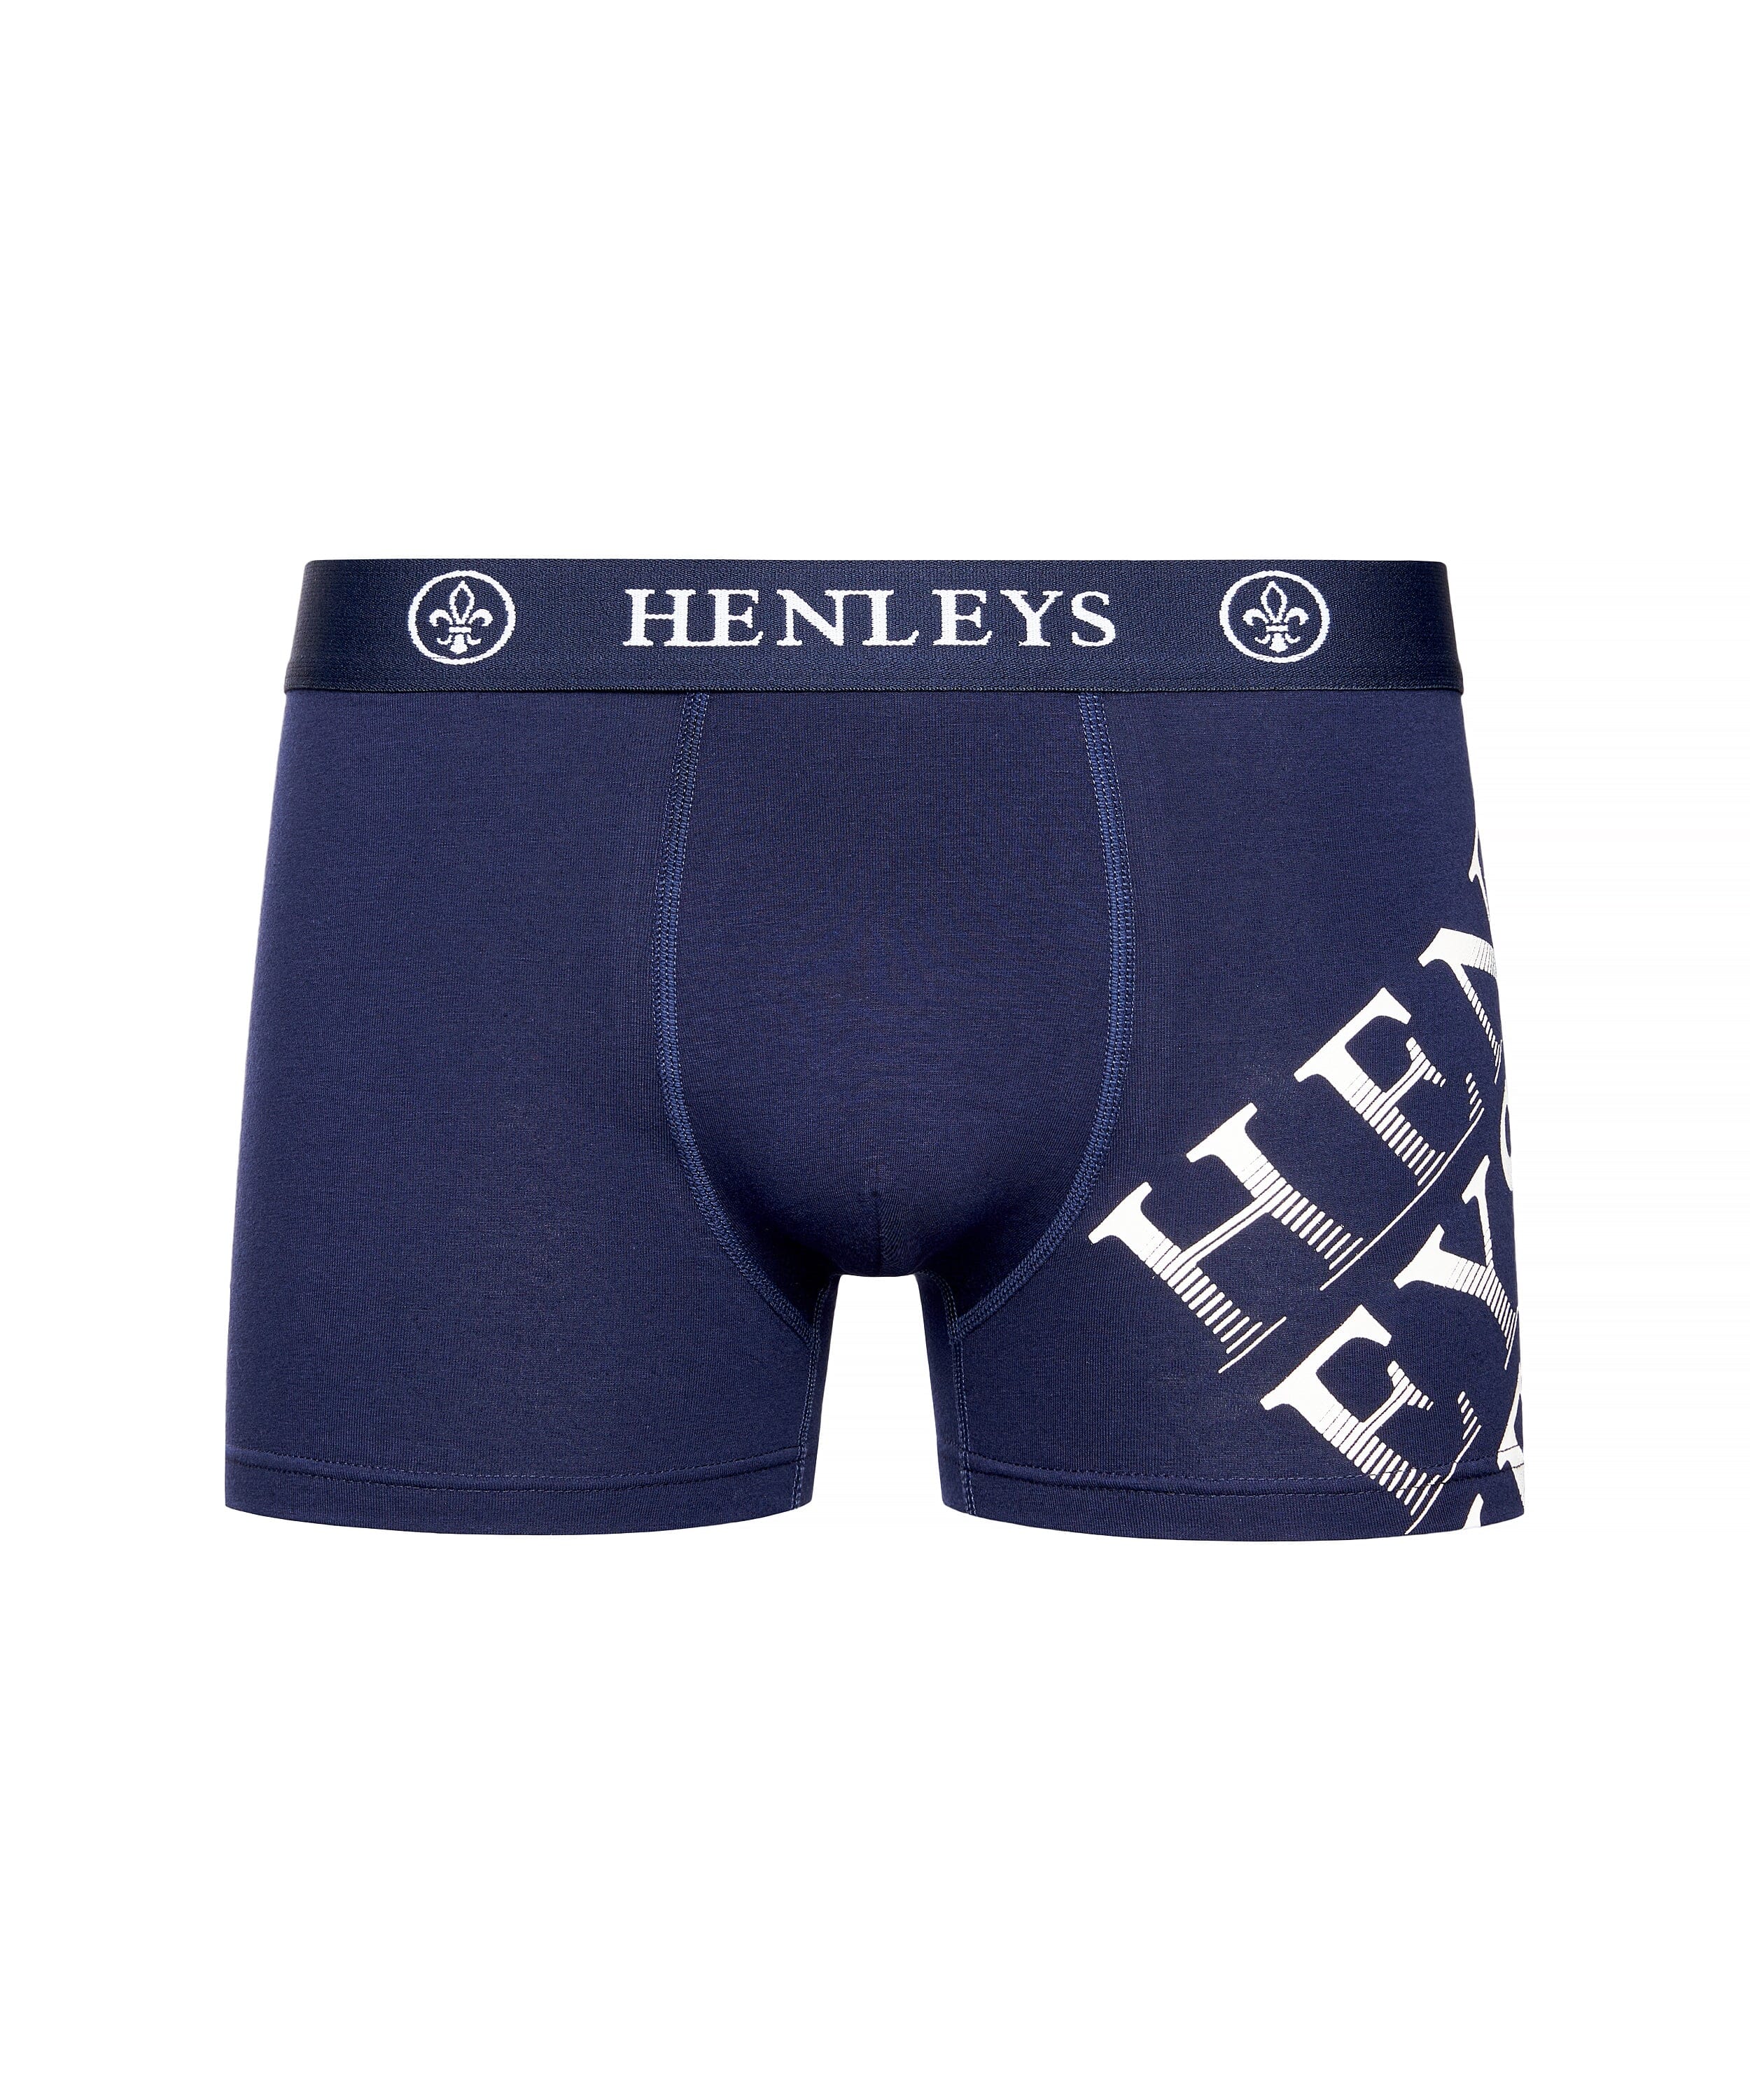 Tringles Boxers 3pk Assorted